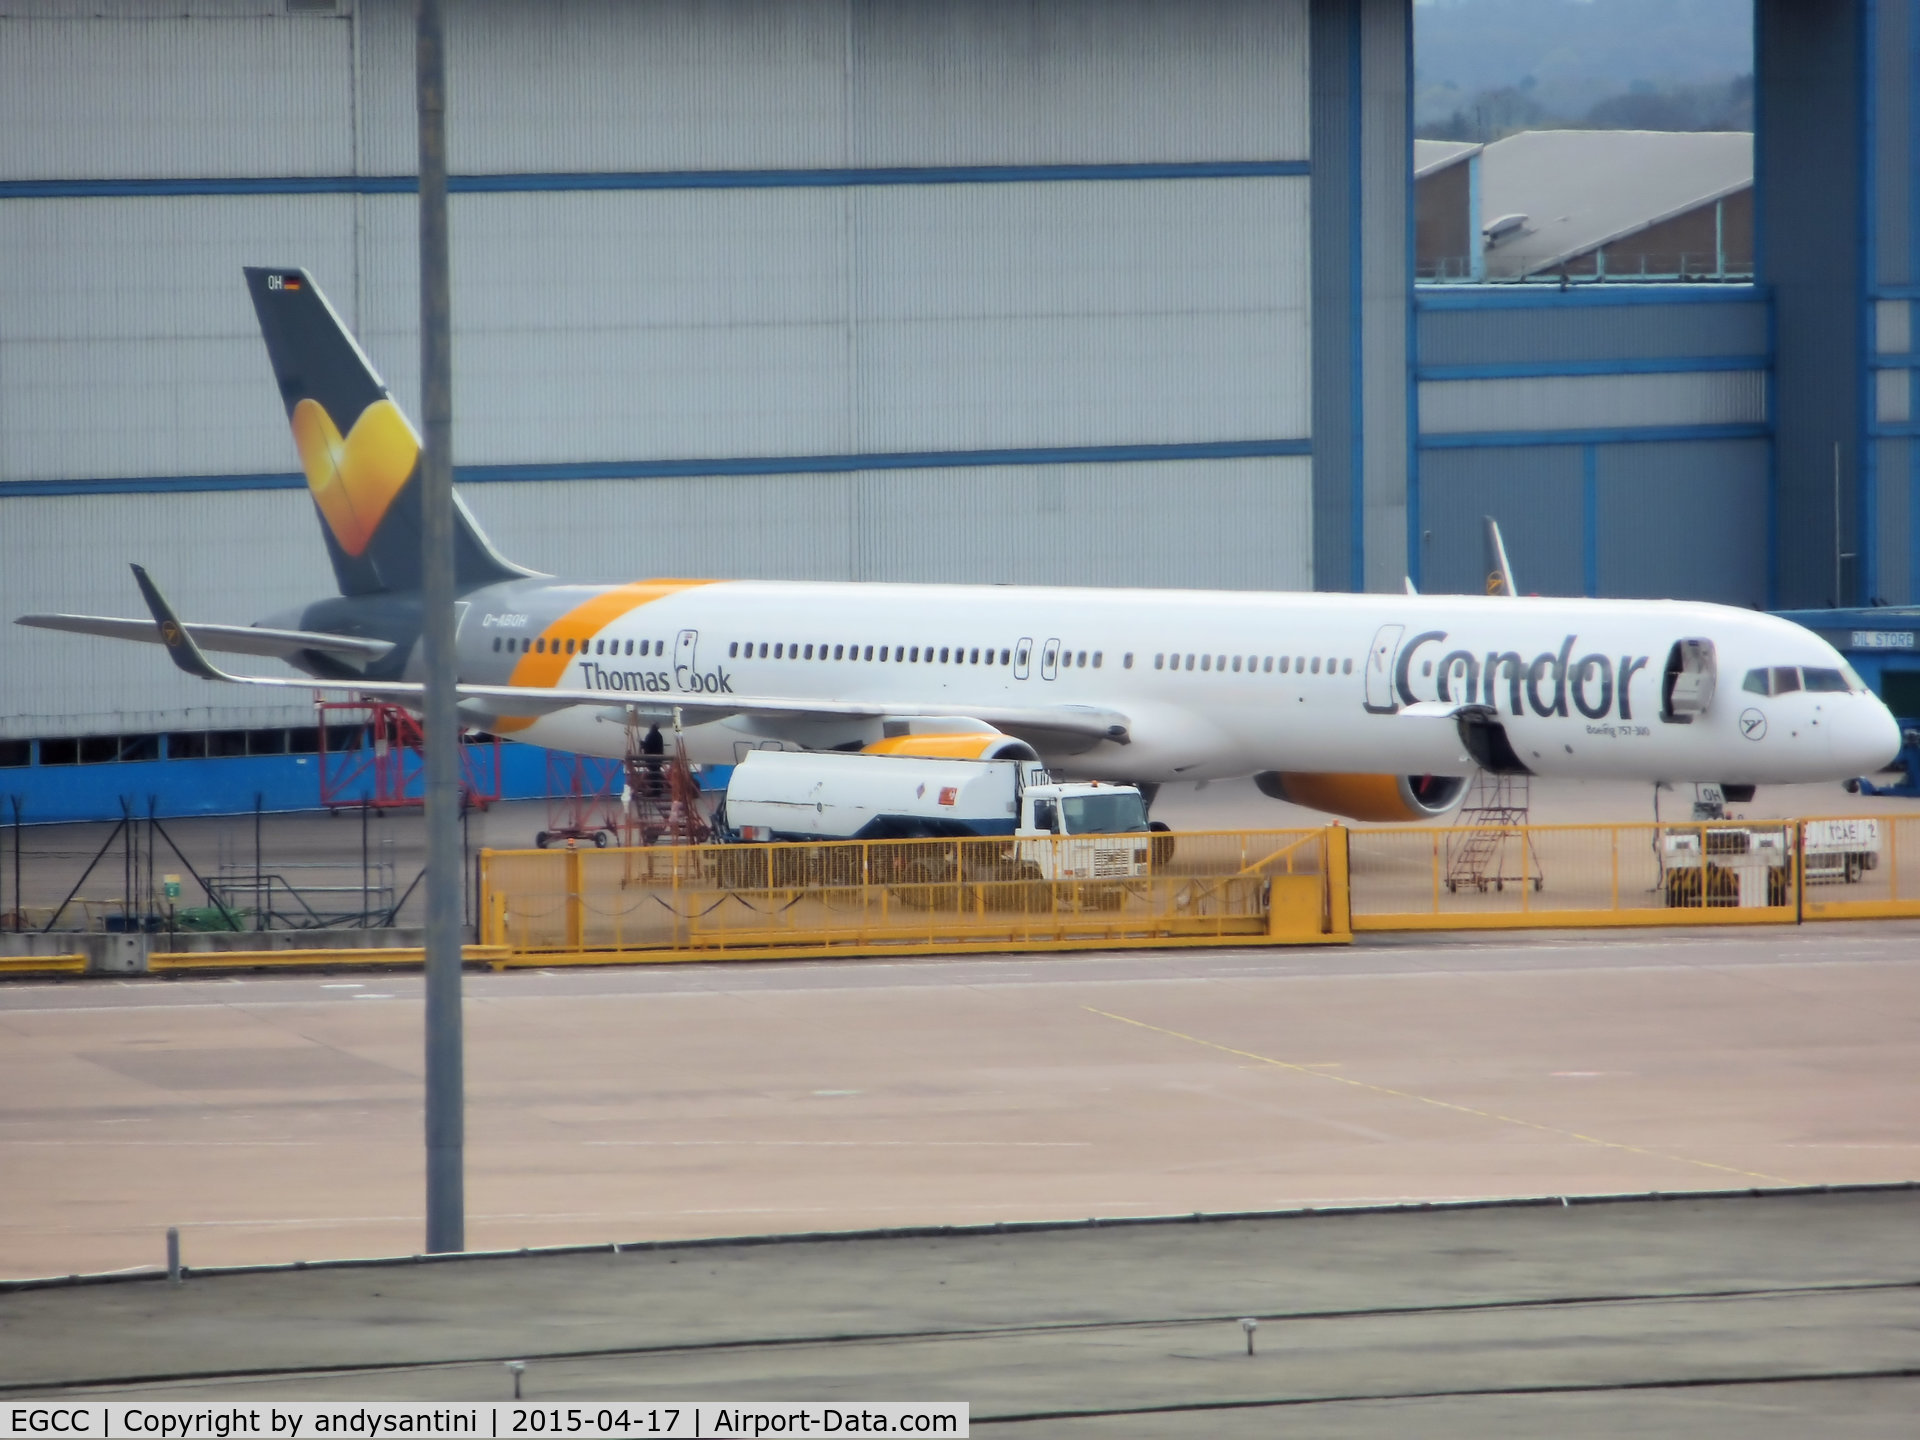 Manchester Airport, Manchester, England United Kingdom (EGCC) - D-ABOH B753 outside thomas cook hanger 